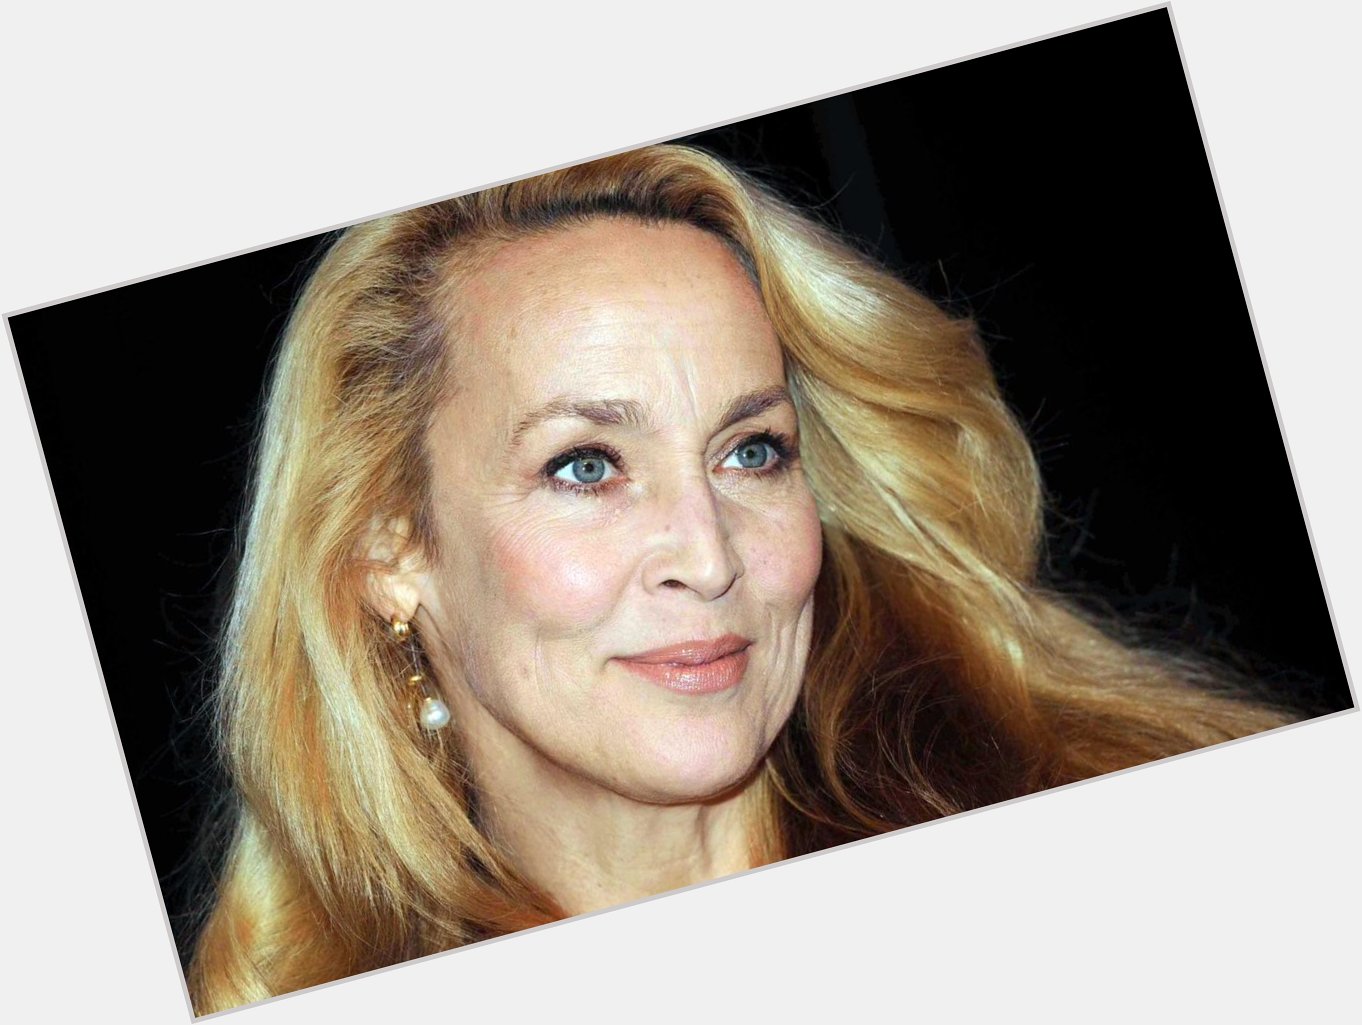 Happy 59th birthday today to former model and actress, Jerry Hall. 